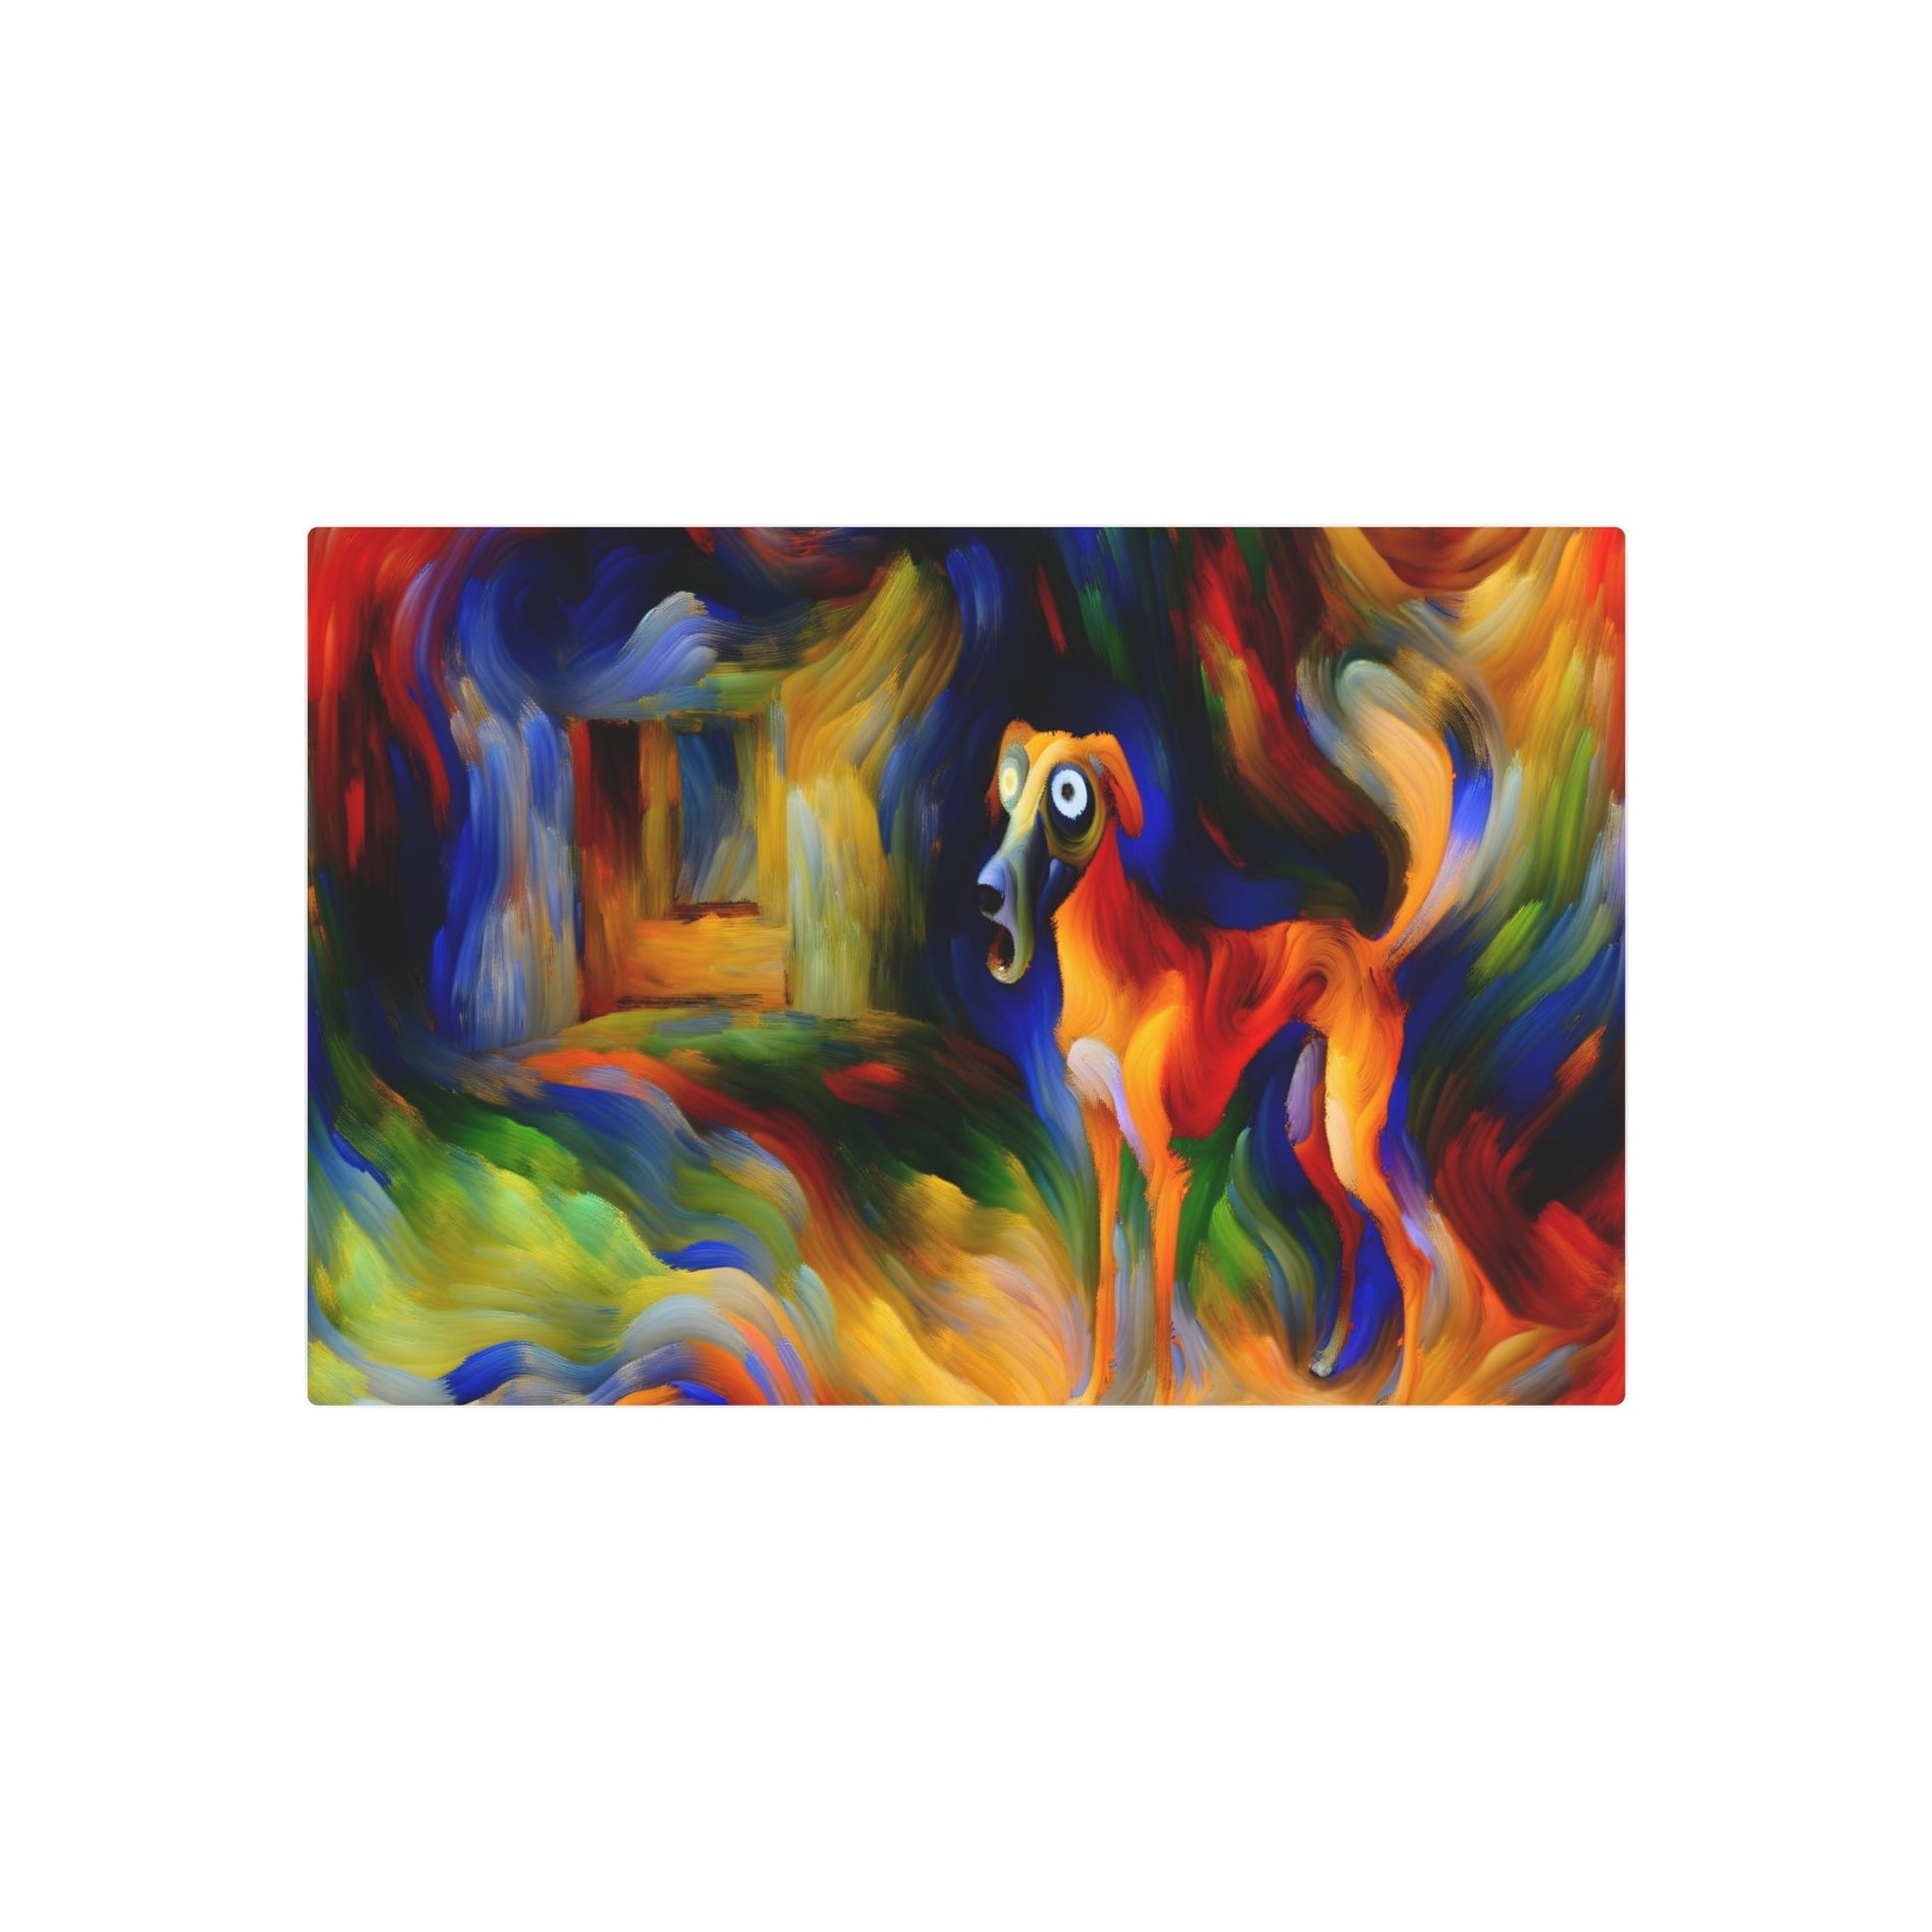 Metal Poster Art | "Expressionist Style Vivid and Emotional Dog Scene - Western Art Styles Expressionism Collection" - Metal Poster Art 30″ x 20″ (Horizontal) 0.12''